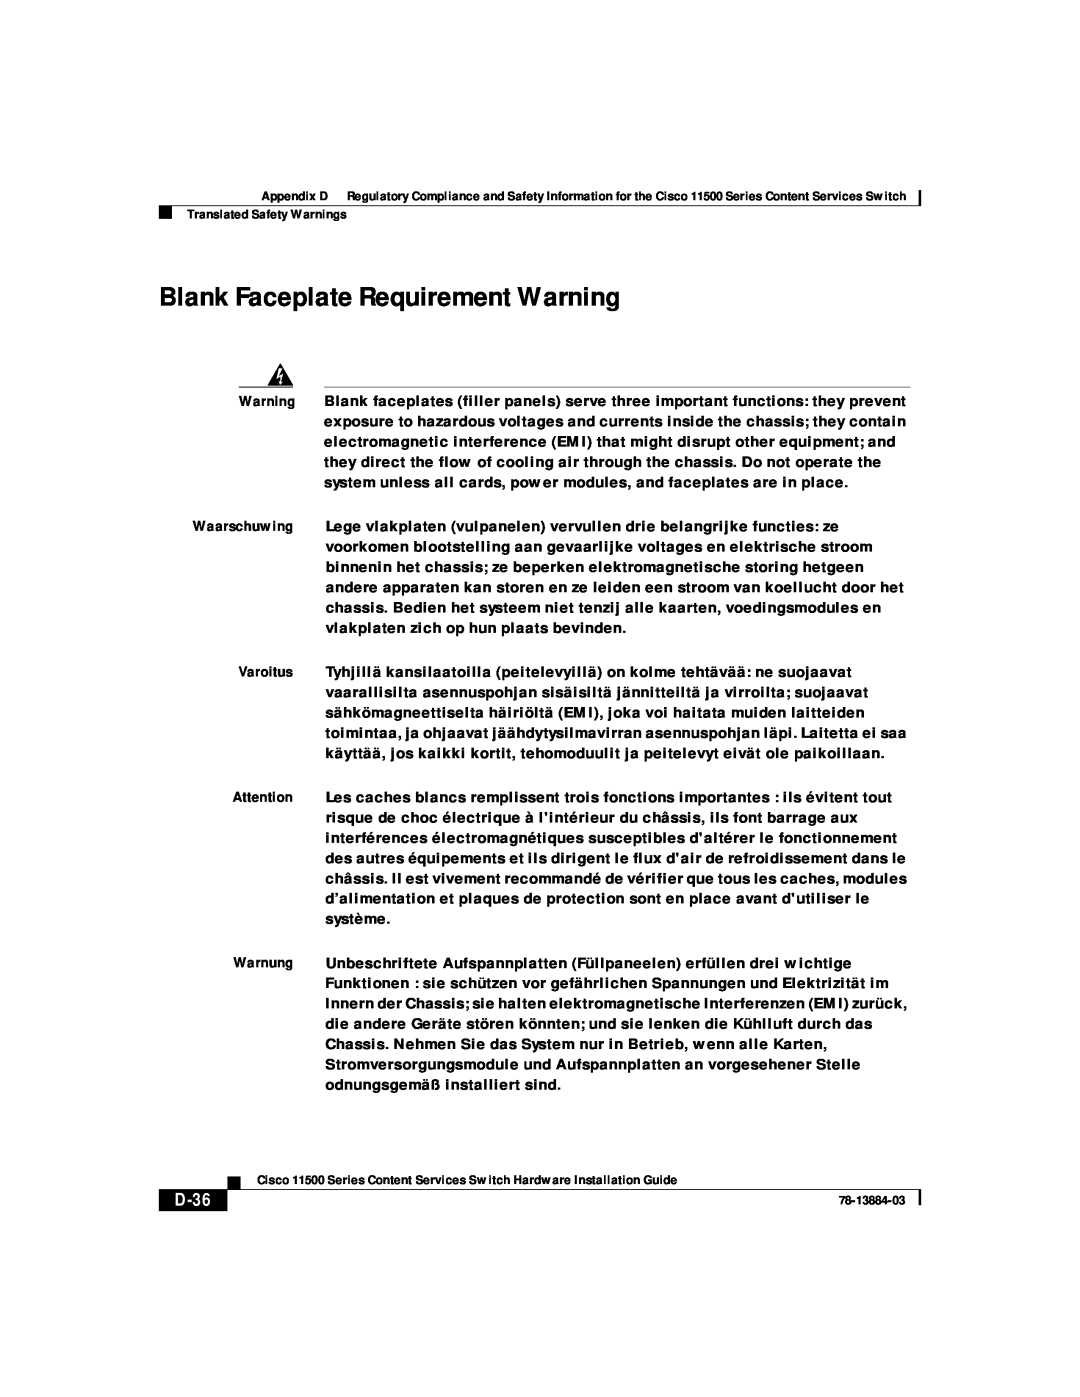 Cisco Systems 11500 Series manual Blank Faceplate Requirement Warning, D-36 